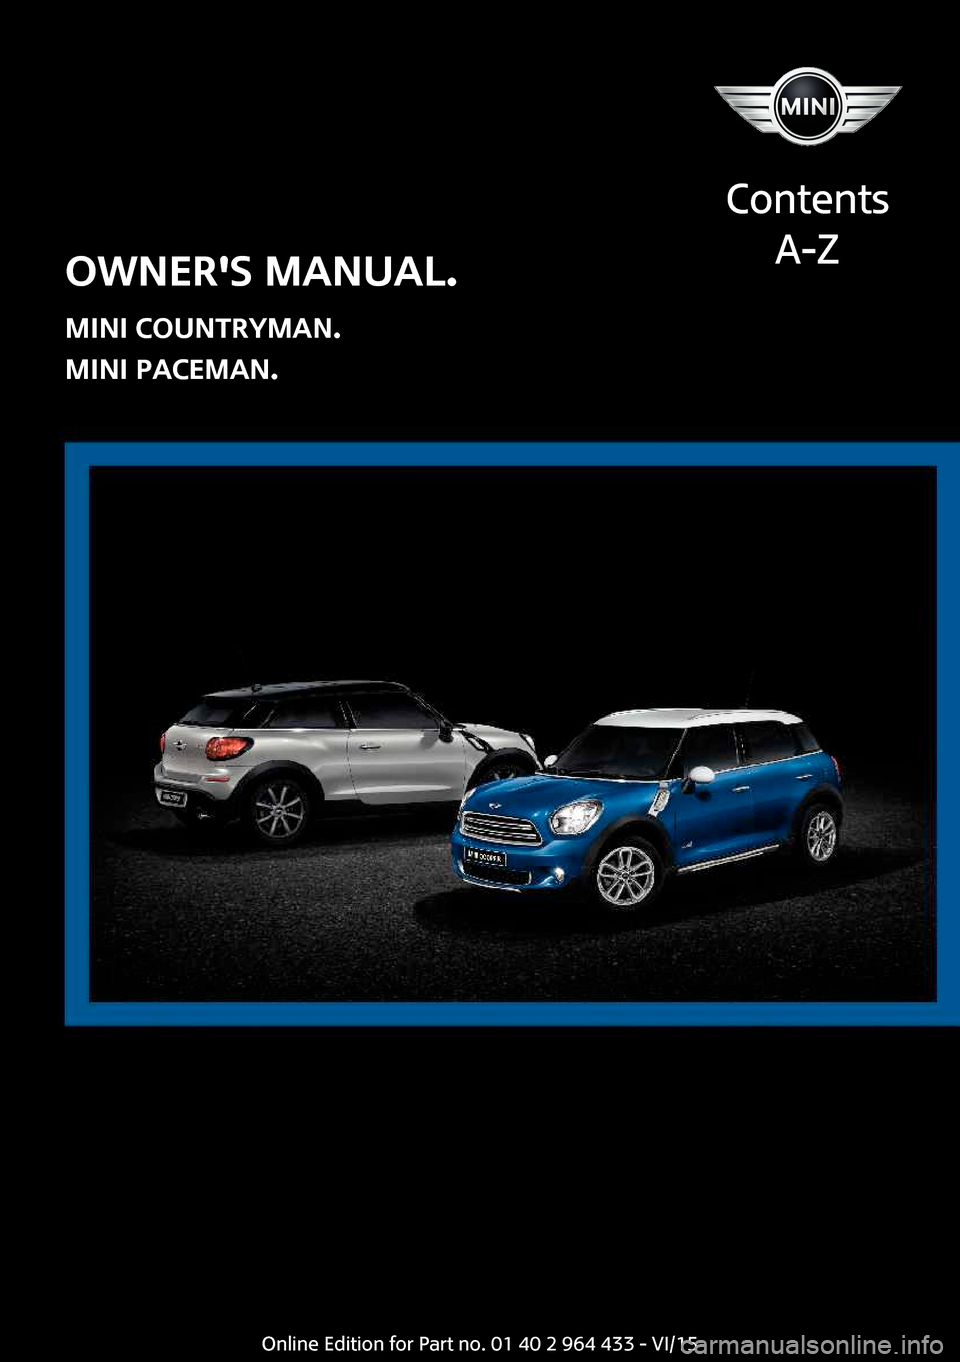 MINI Paceman 2016  Owners Manual (Mini Connected) OWNERS MANUAL.
MINI COUNTRYMAN.
MINI PACEMAN.
Contents
A-ZOnline Edition for Part no. 01 40 2 964 433 - VI/15  